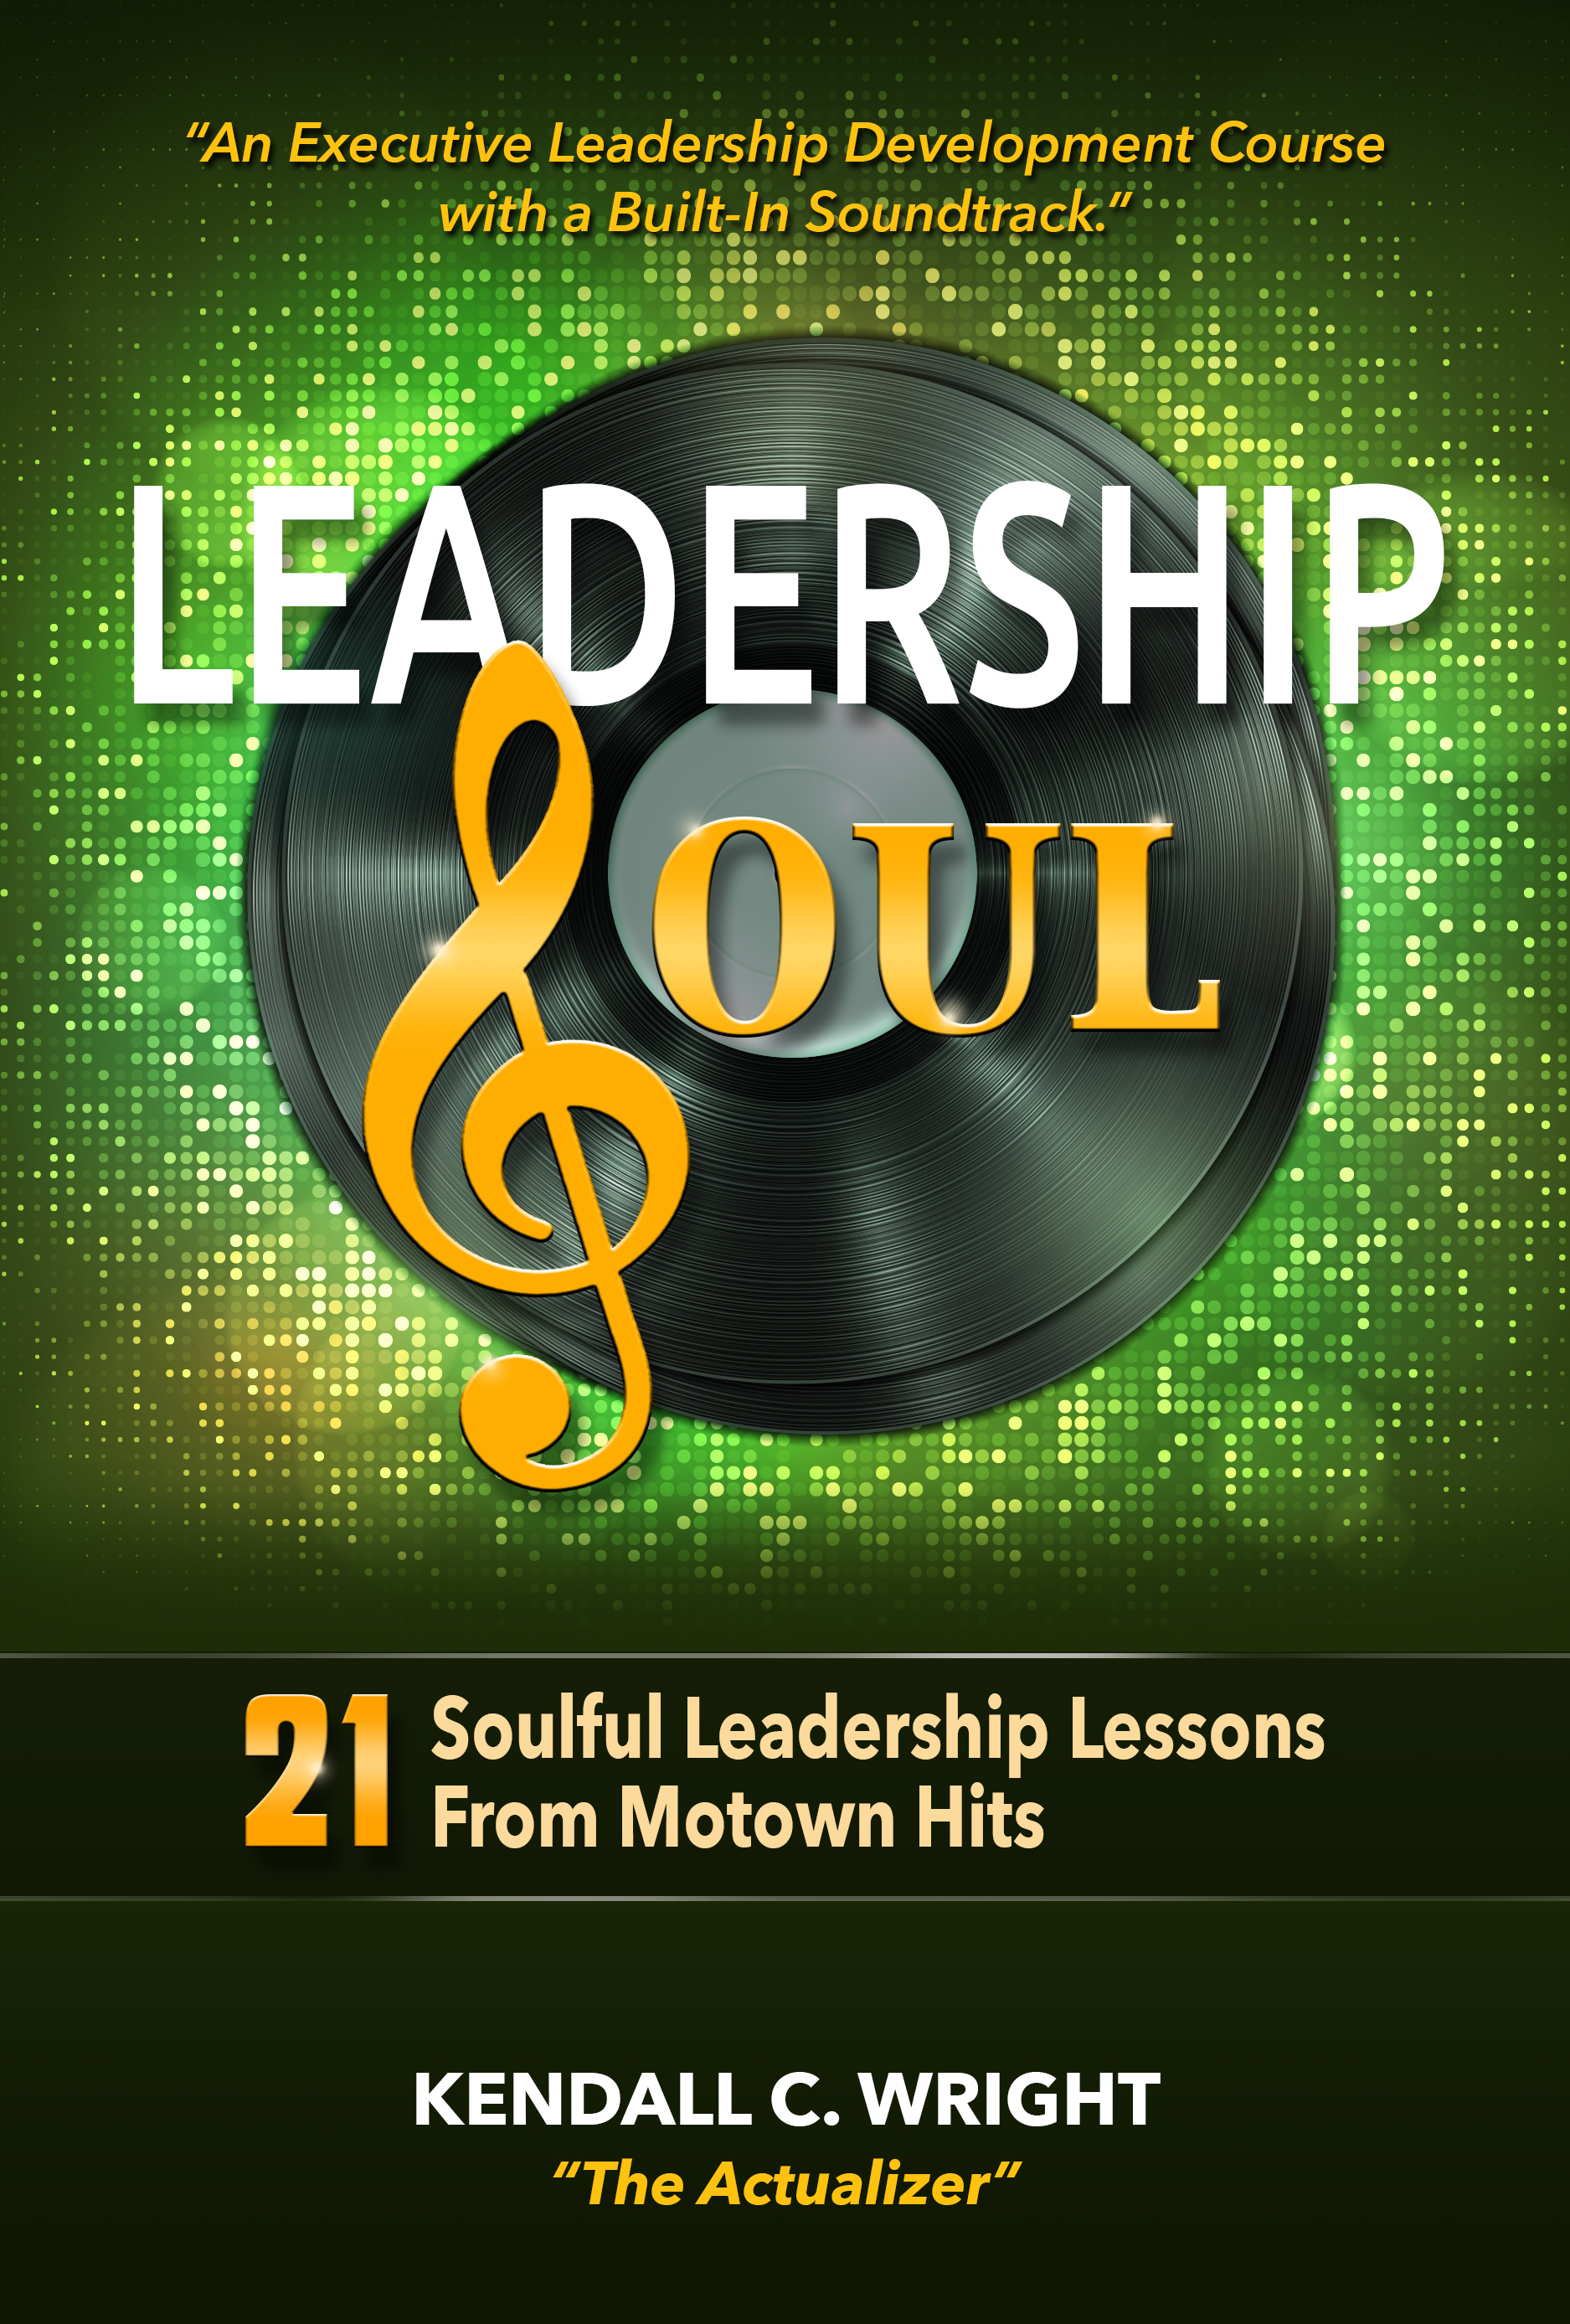 Leadership Soul: 21 Soulful Leadership Lessons from Motown Hits, provides the insights, instruction, and inspiration to expand and enhance your leadership skillset. 